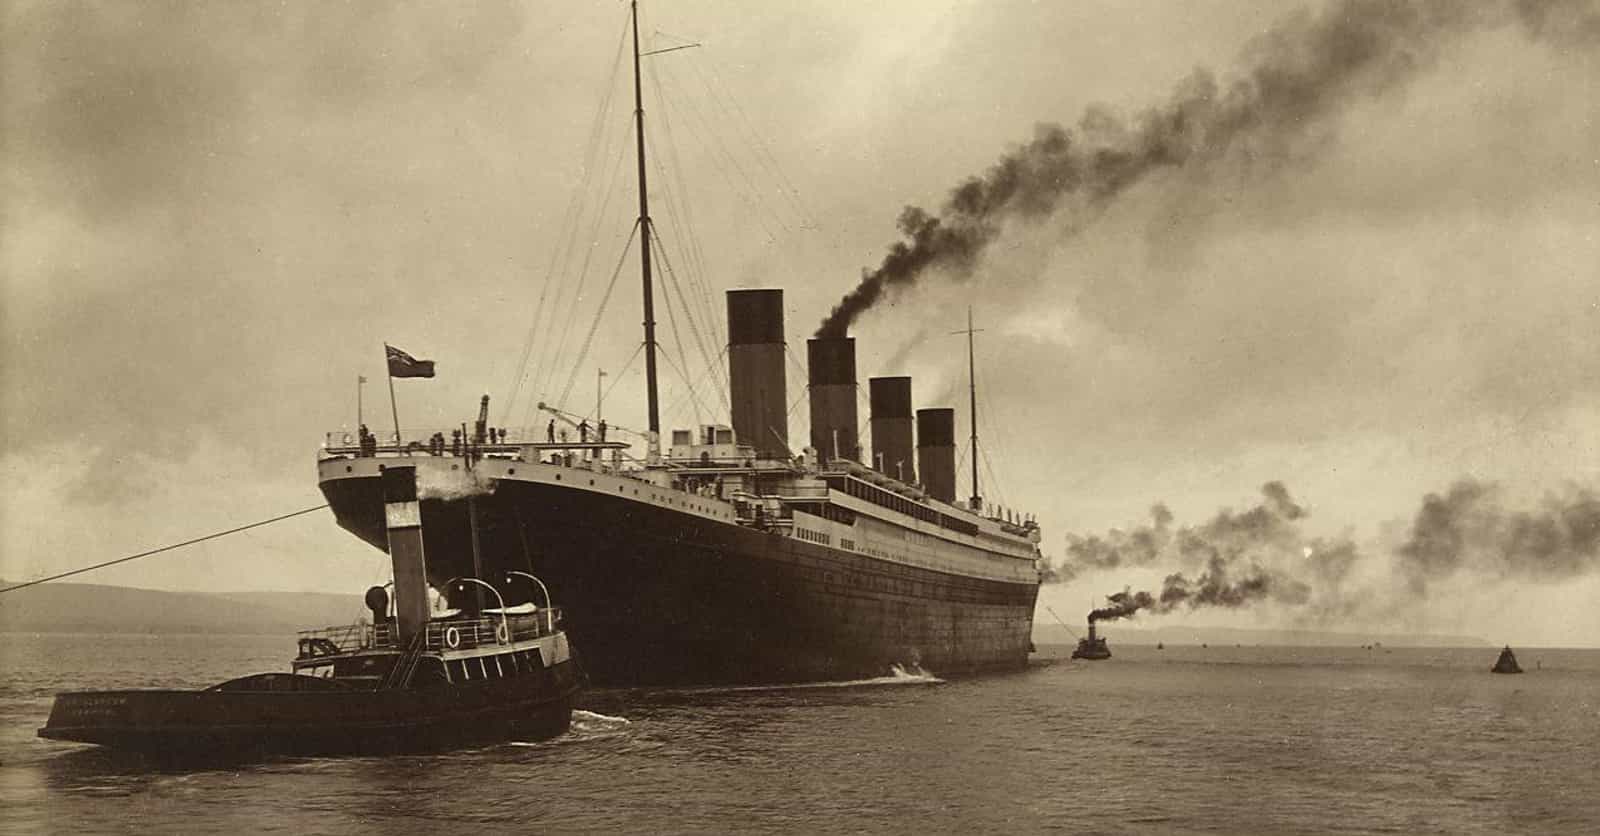 Common Myths About The Titanic Sinking That Aren’t Verifiably True